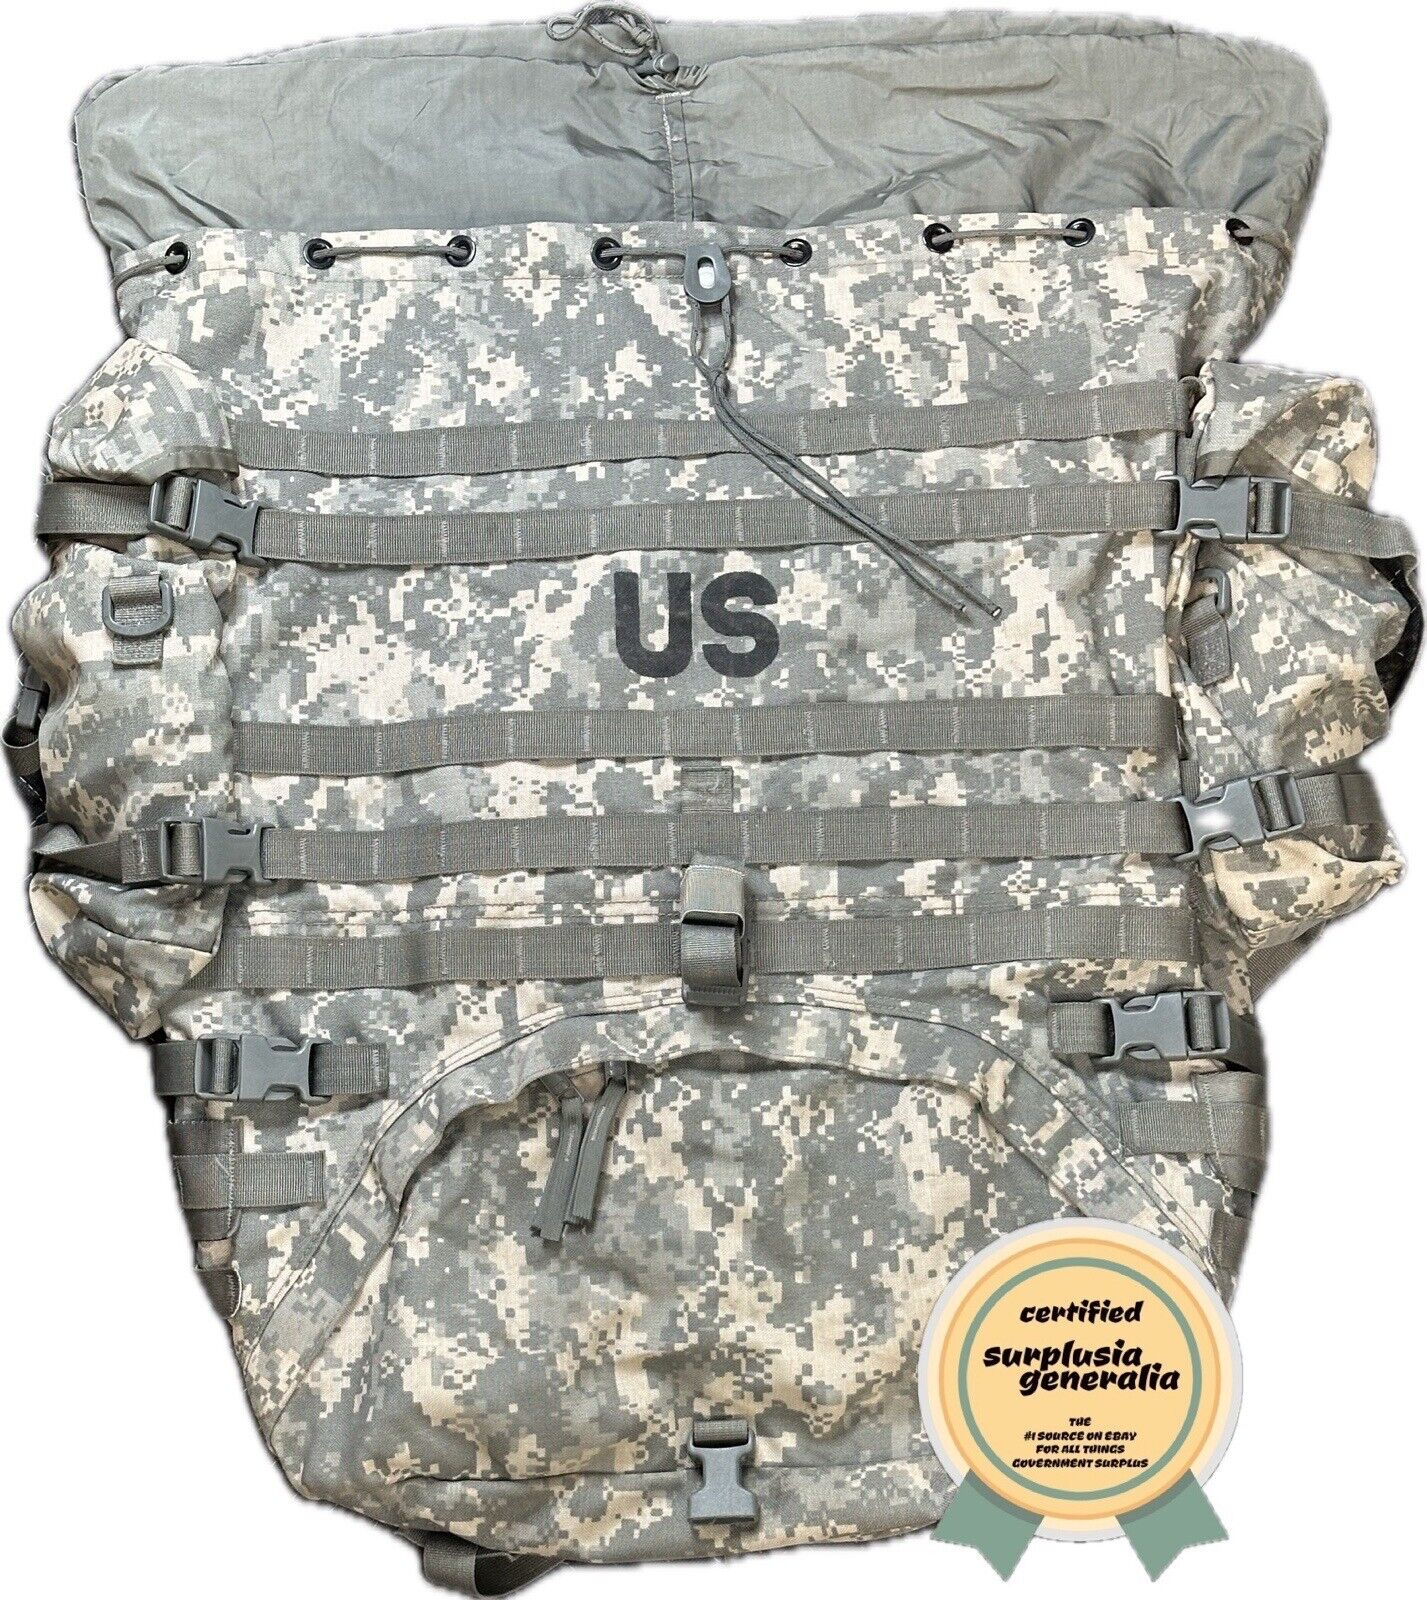 MOLLE II Large Rucksack Complete Gen2 Field Pack Set w/ Straps, Frame, Pouches